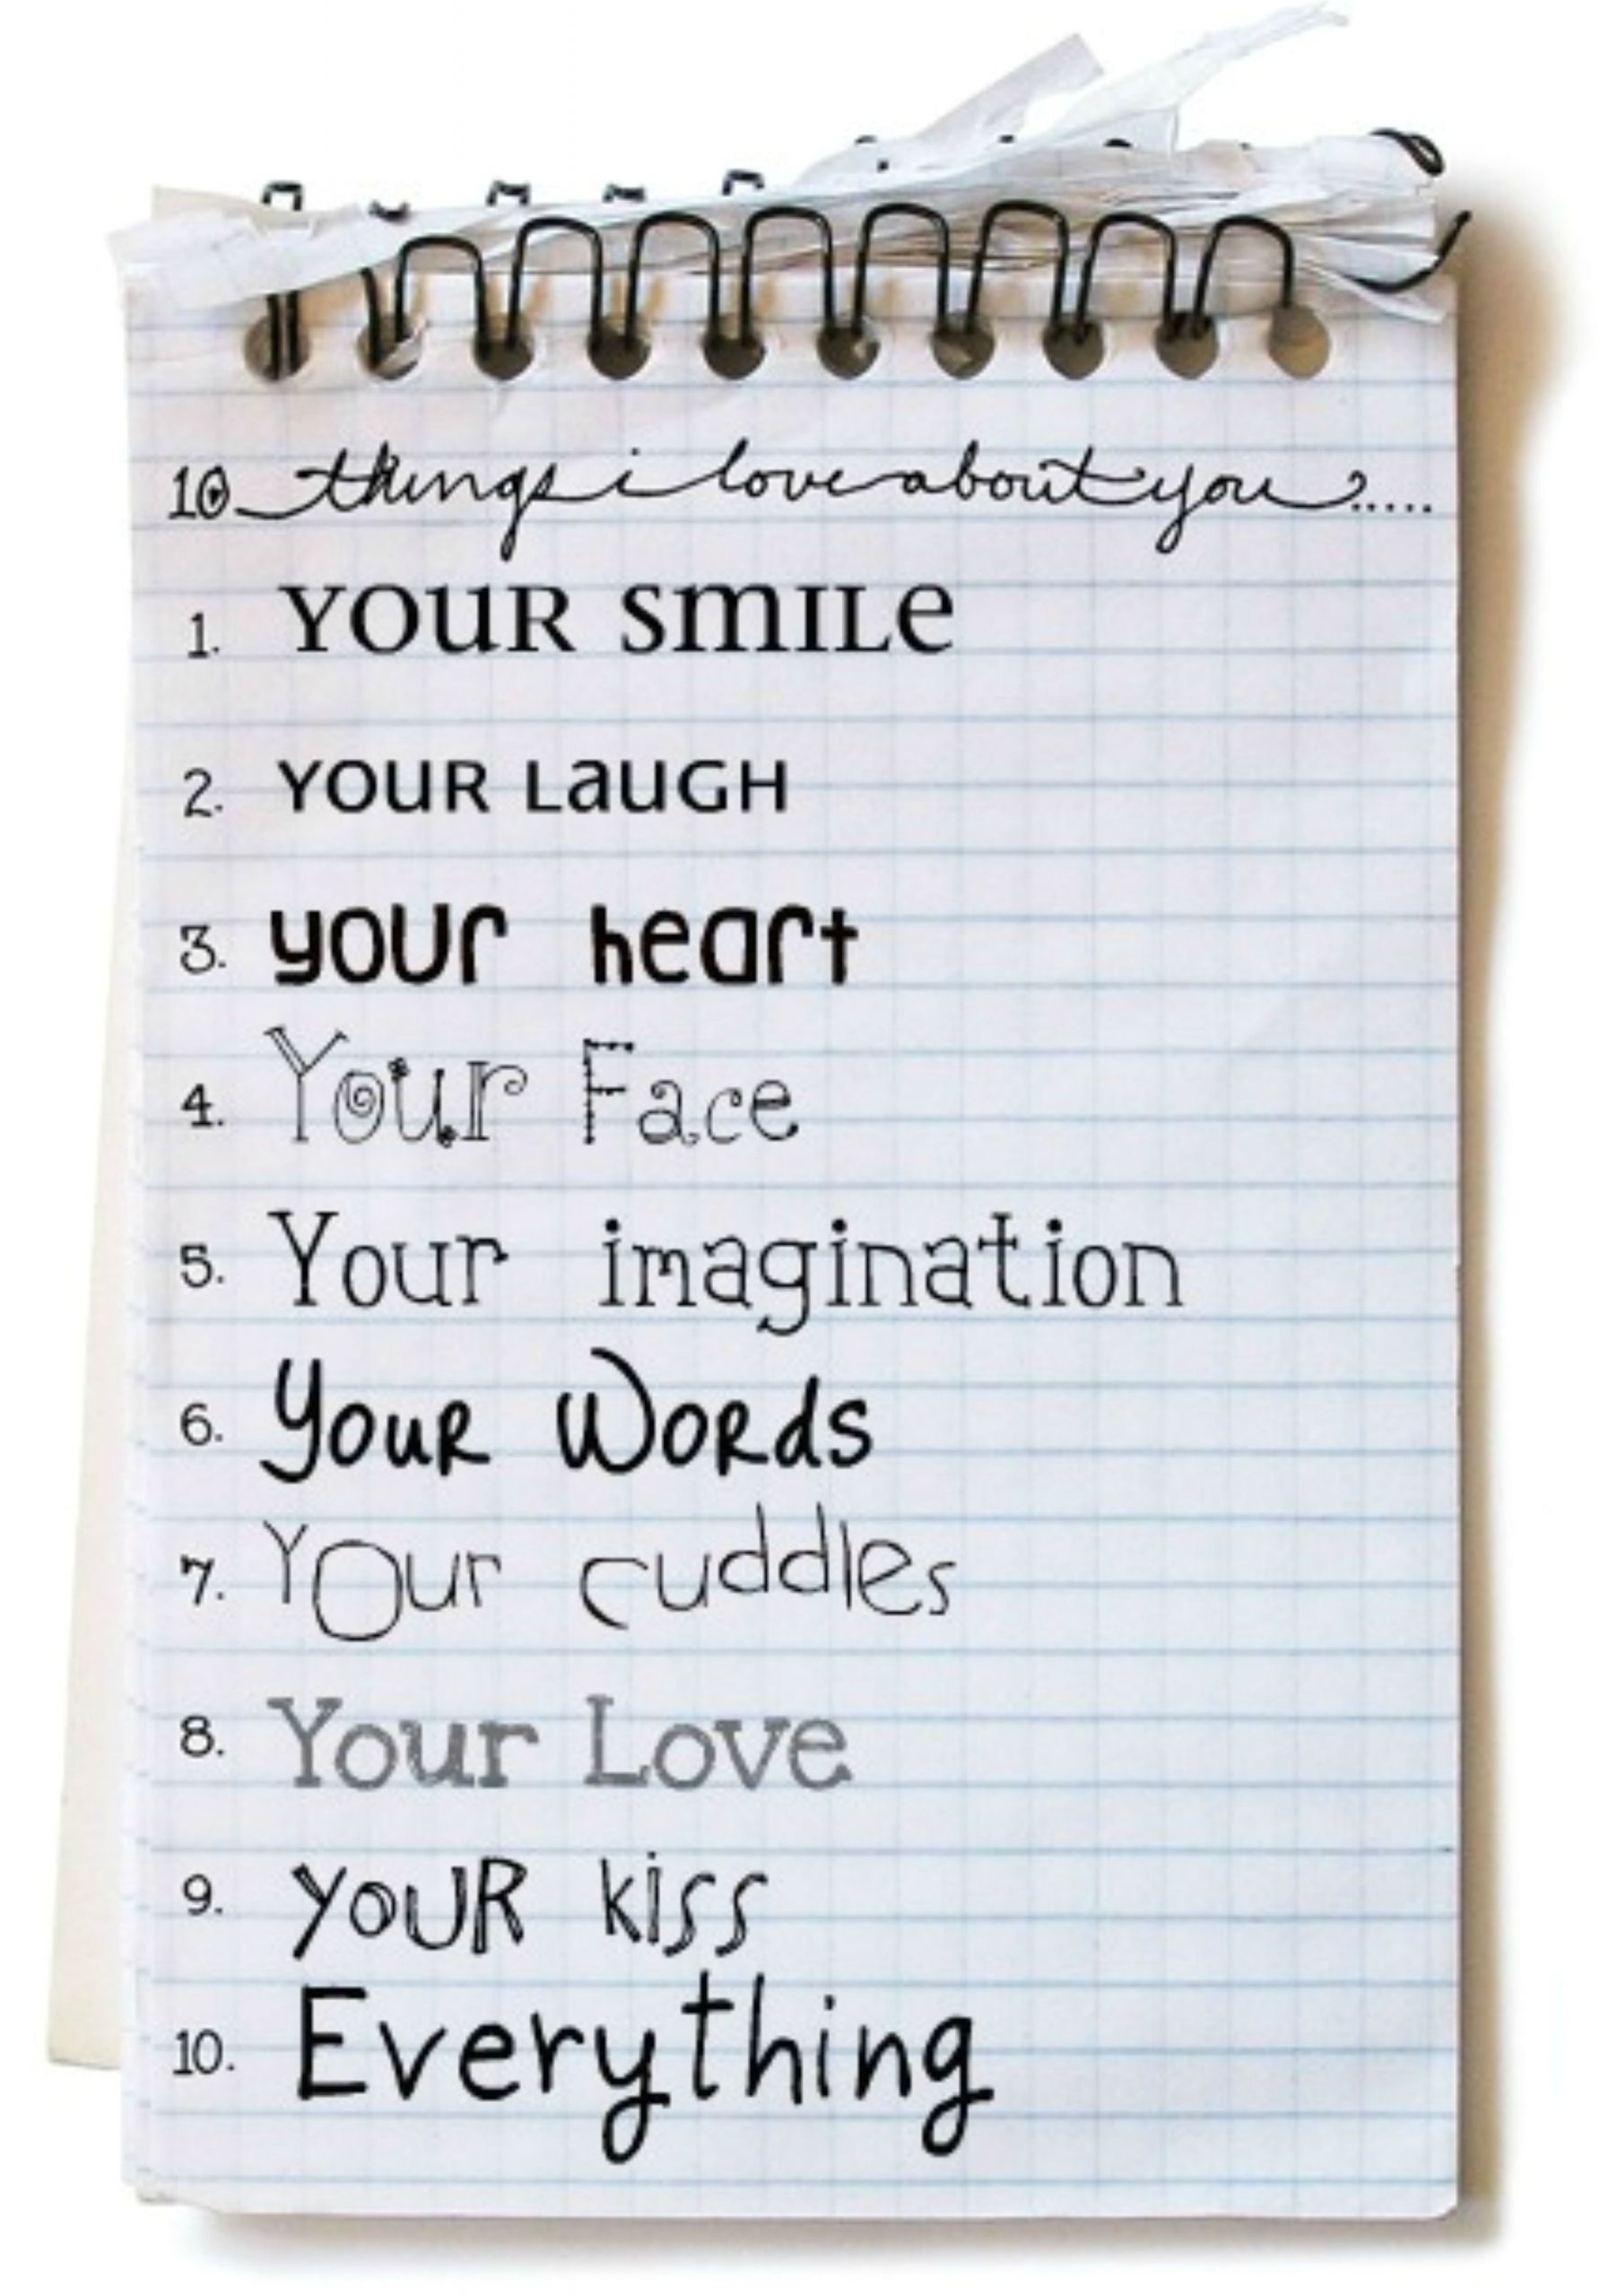 Love Words to Write In A Card 10 Things I Love About You with Images Cards for